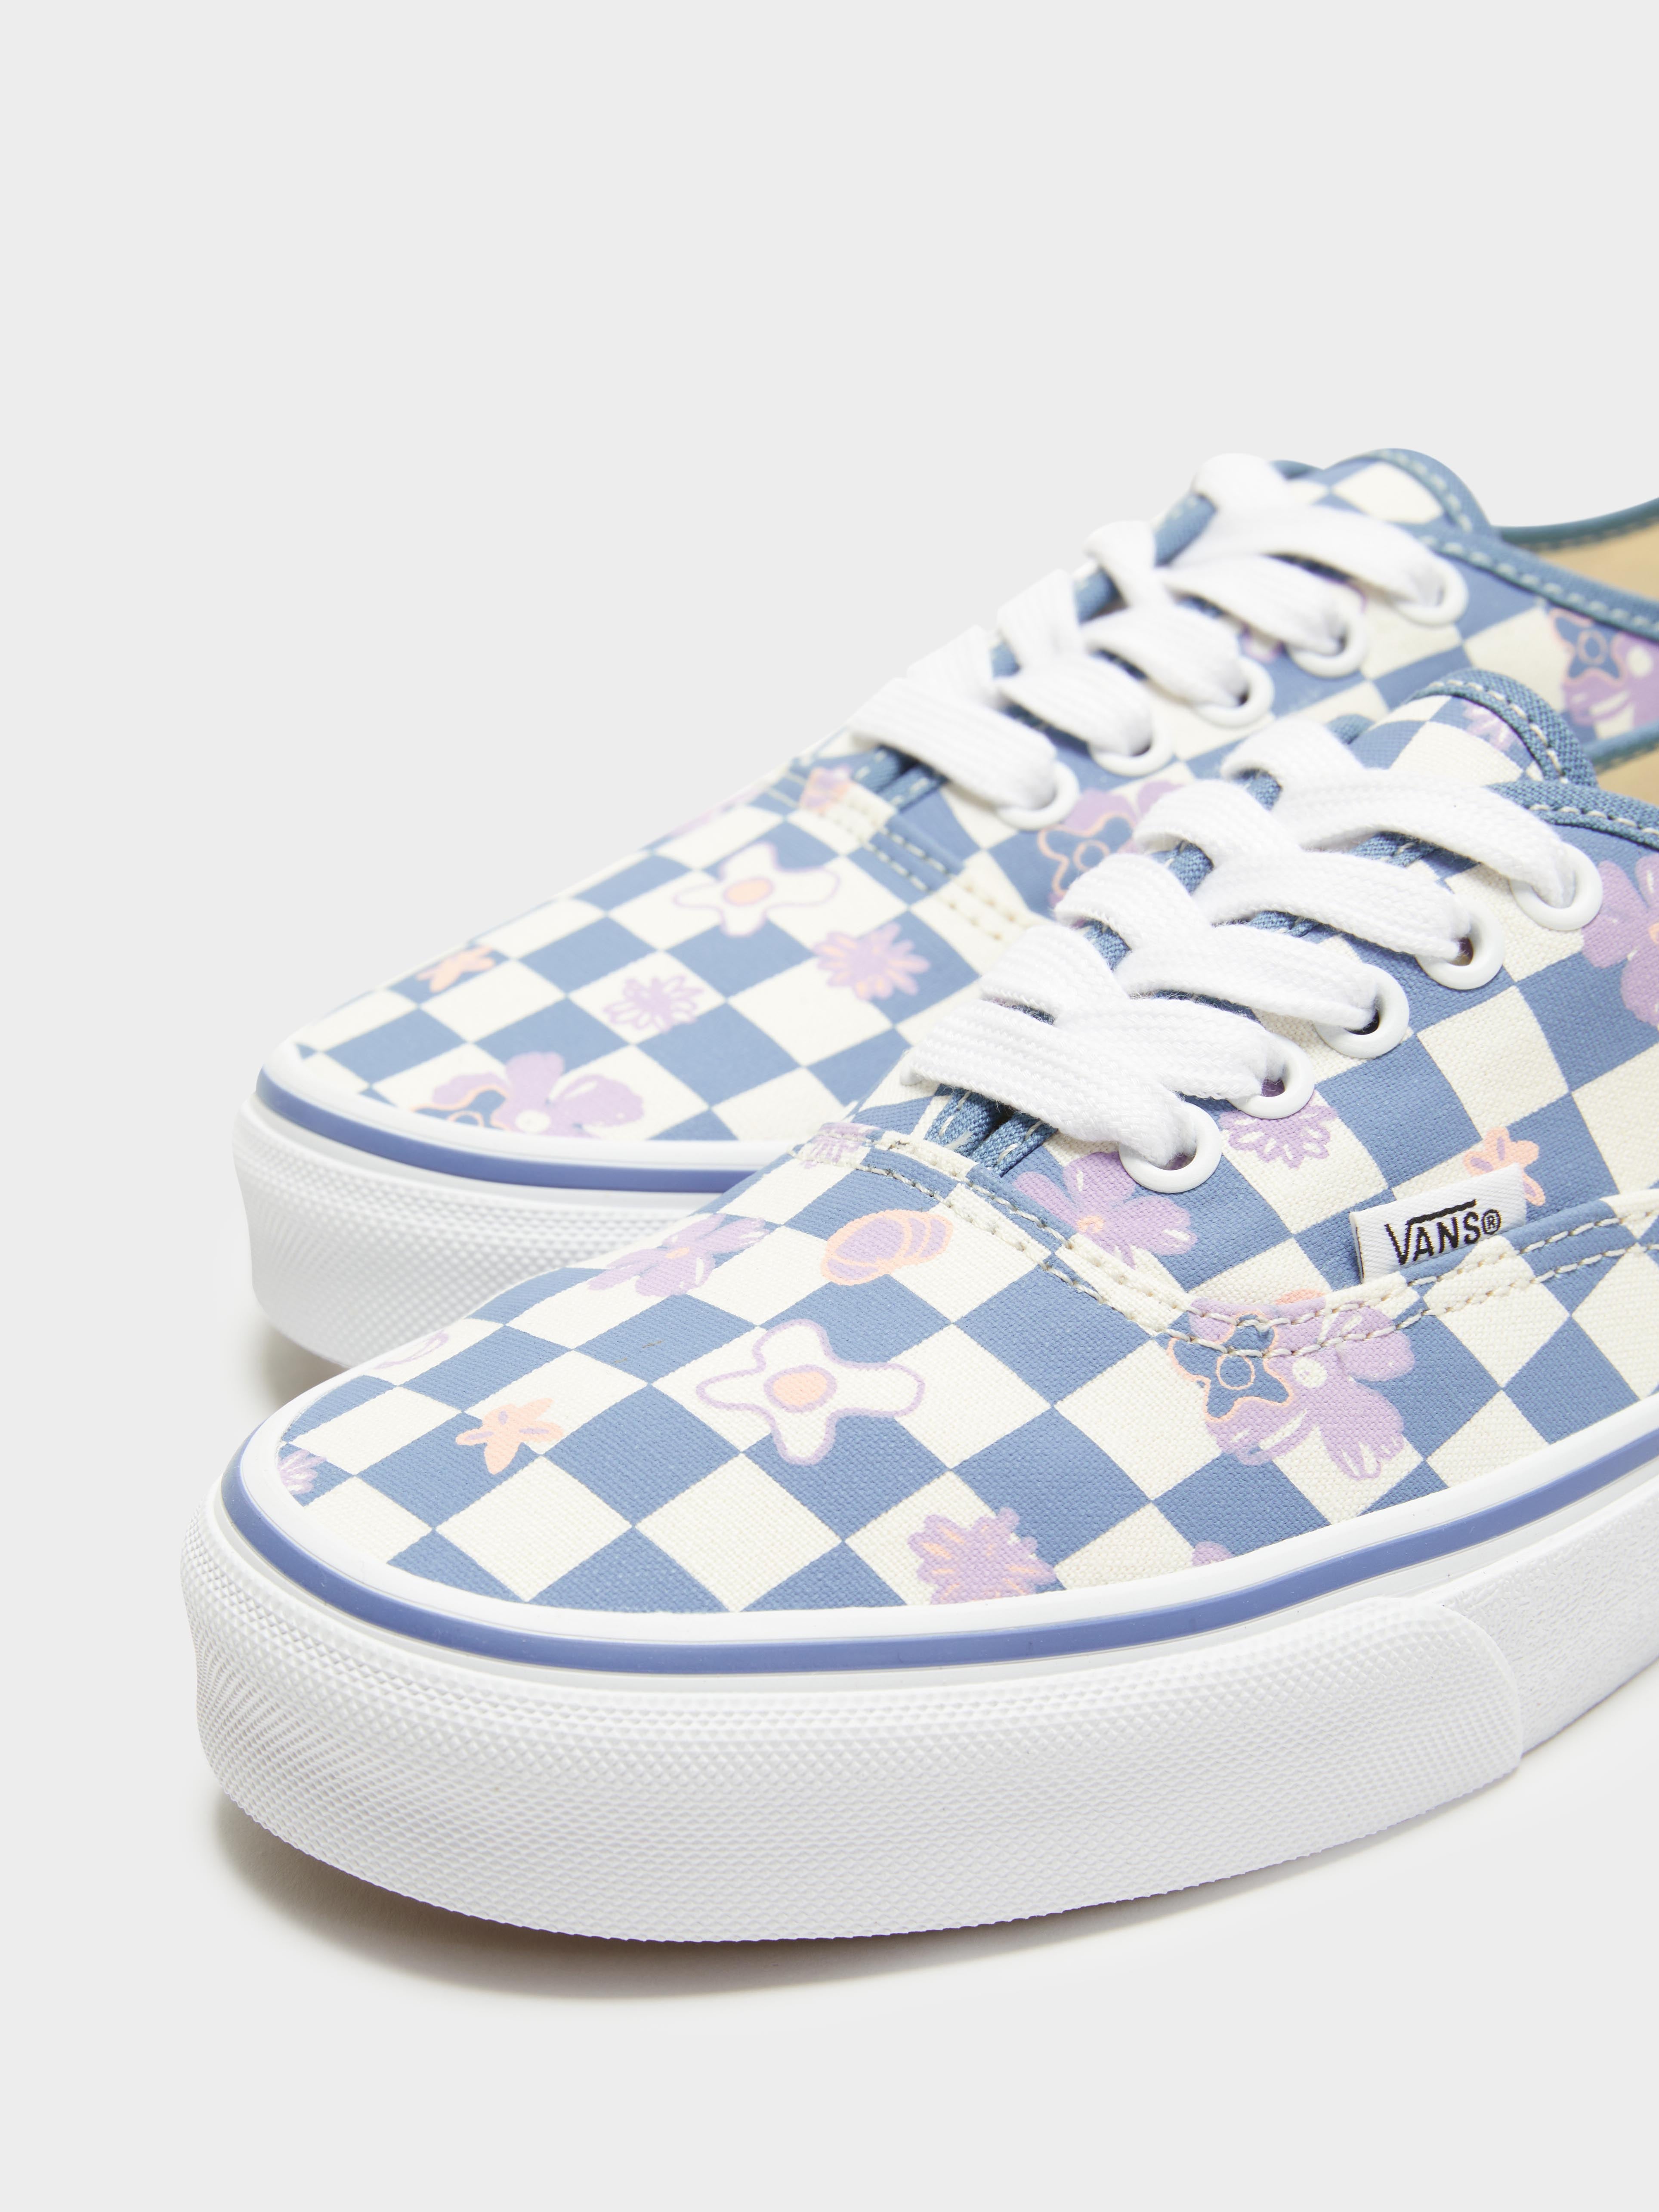 Unisex Authentic Floral Sneakers in Blue & White